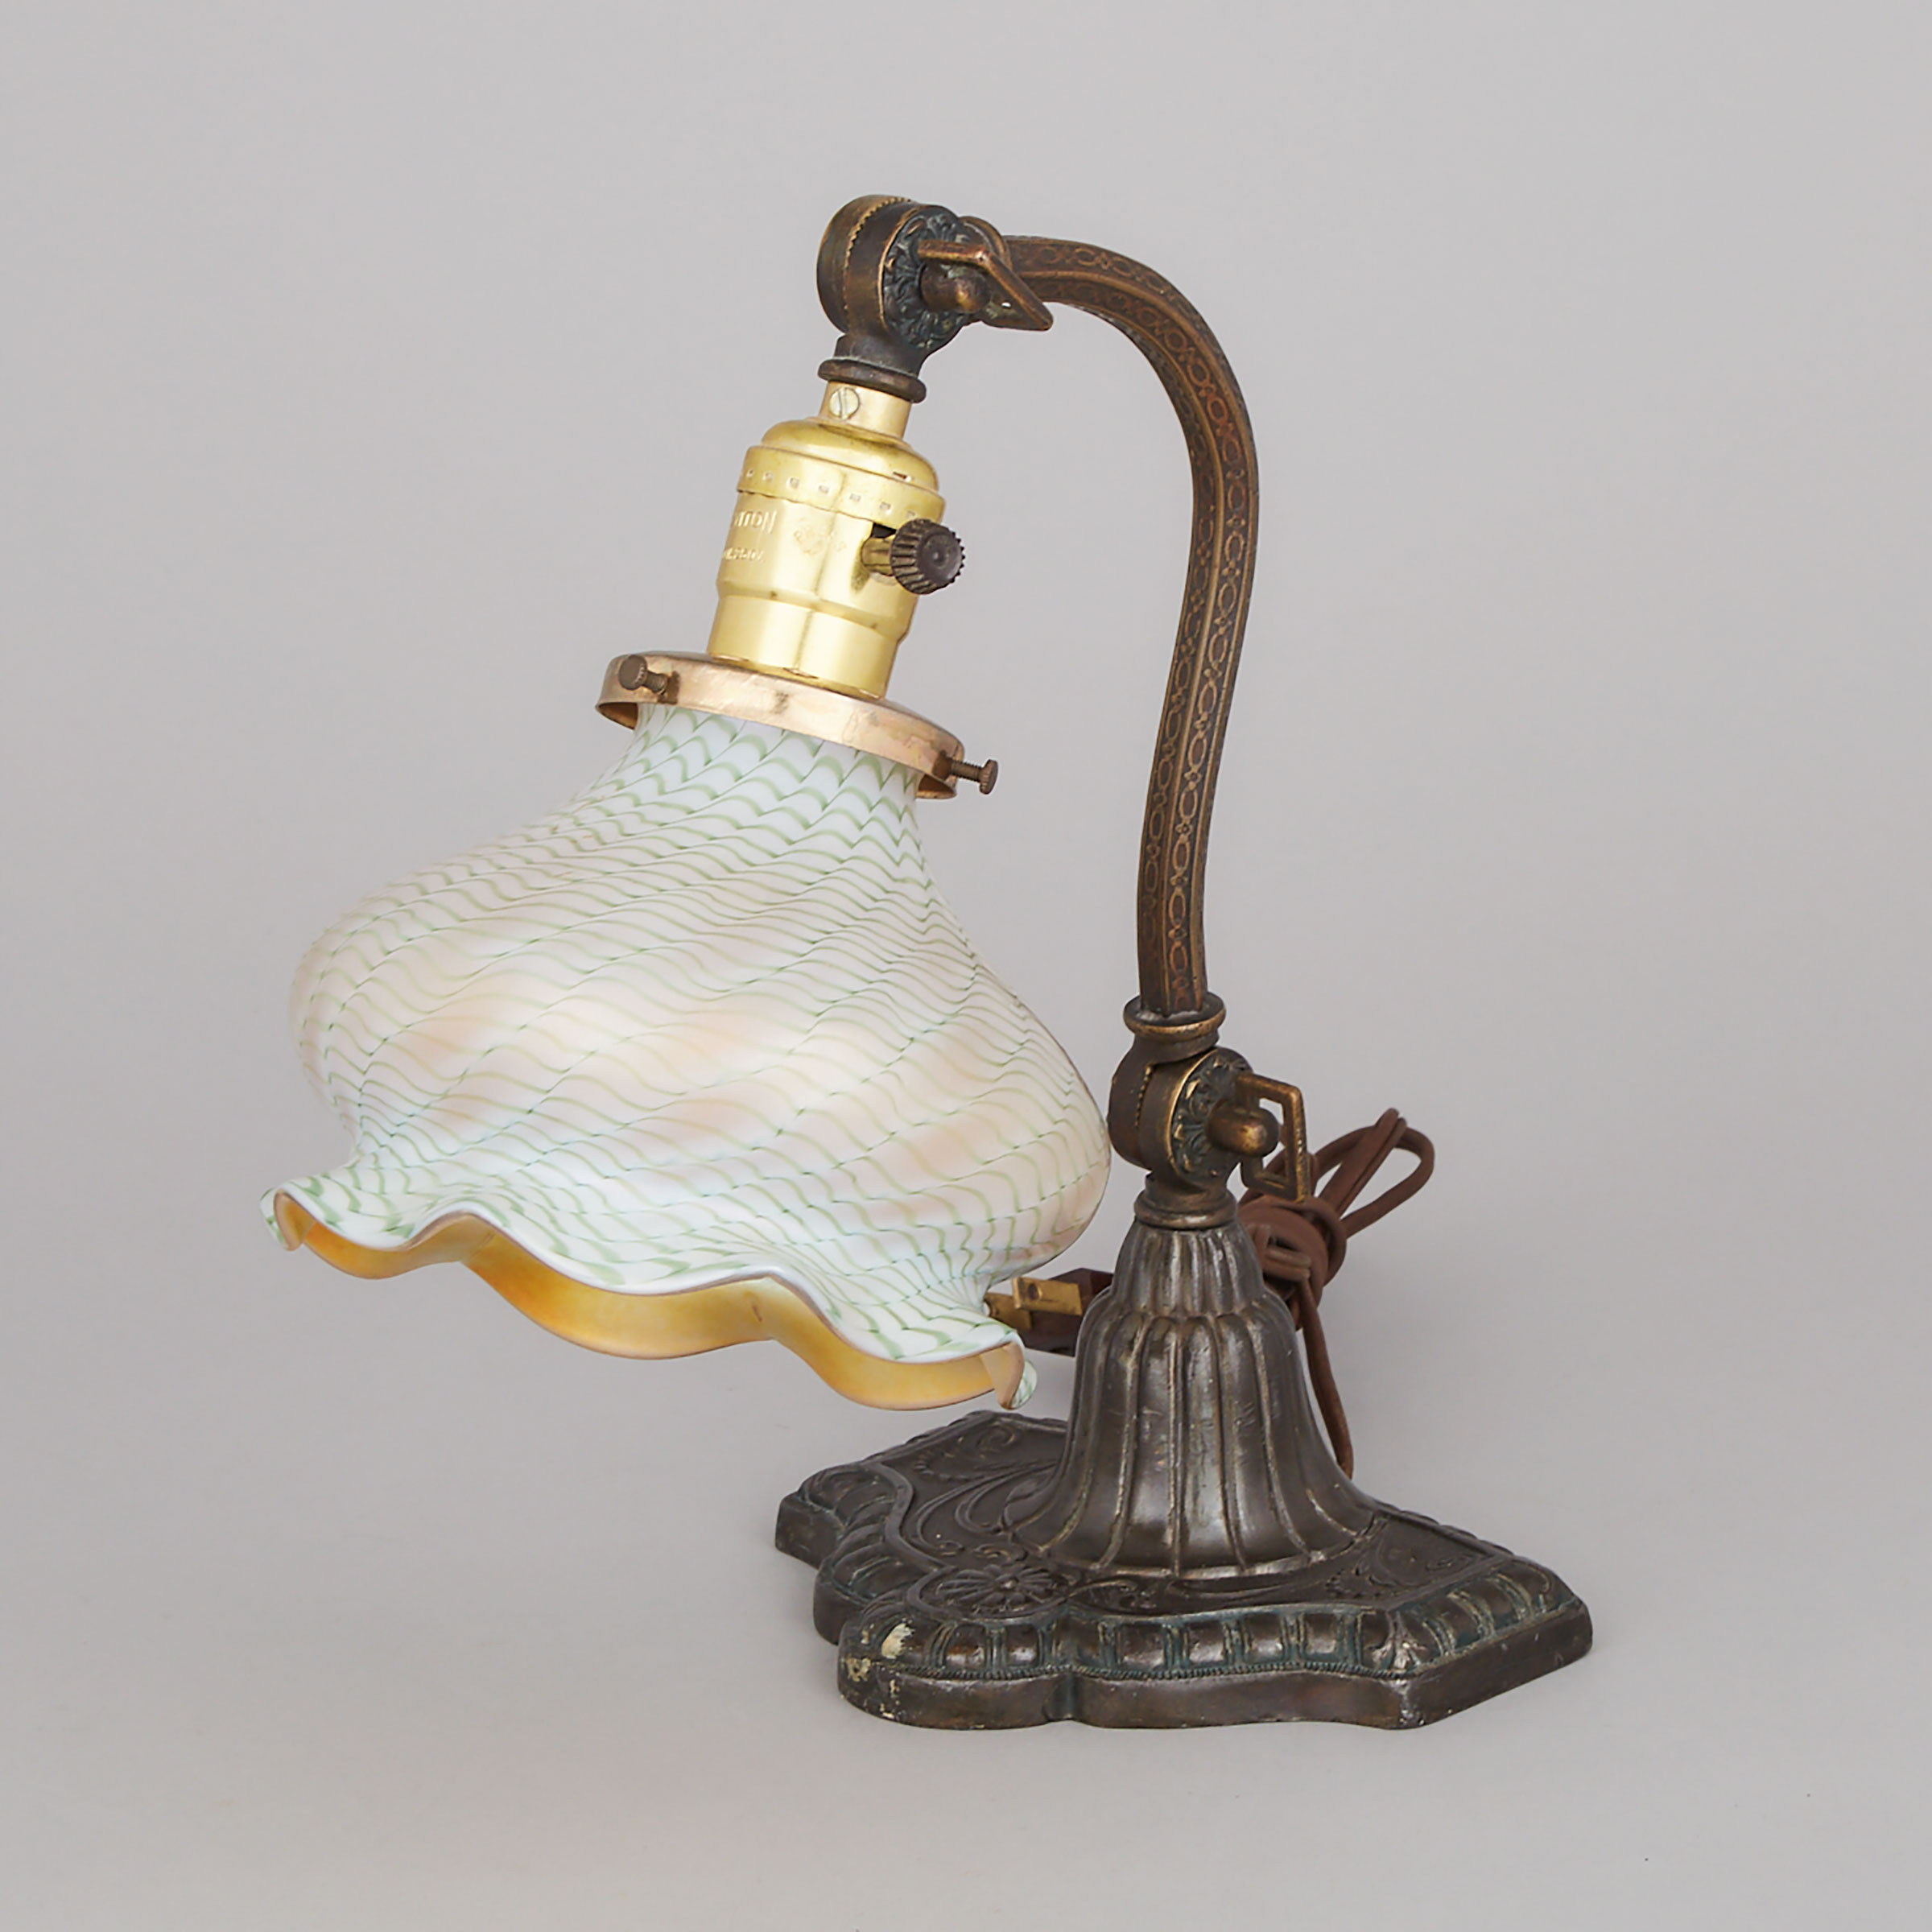 Patinated Metal Piano Lamp with Aurene Glass Shade, early 20th century